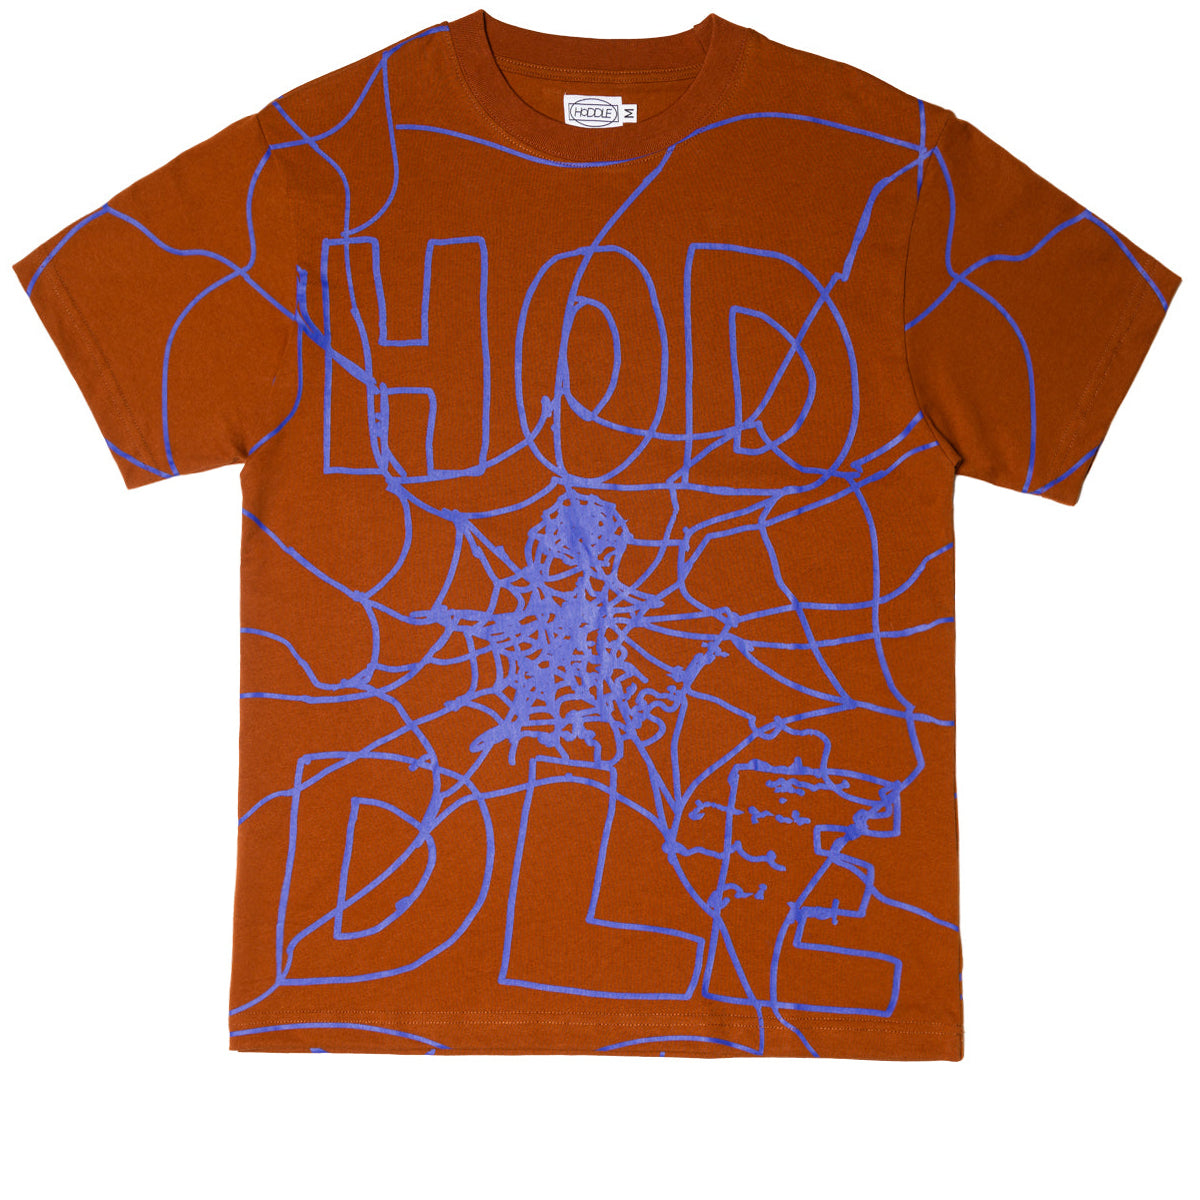 Hoddle Web All Over Print T-Shirt - Brown image 1